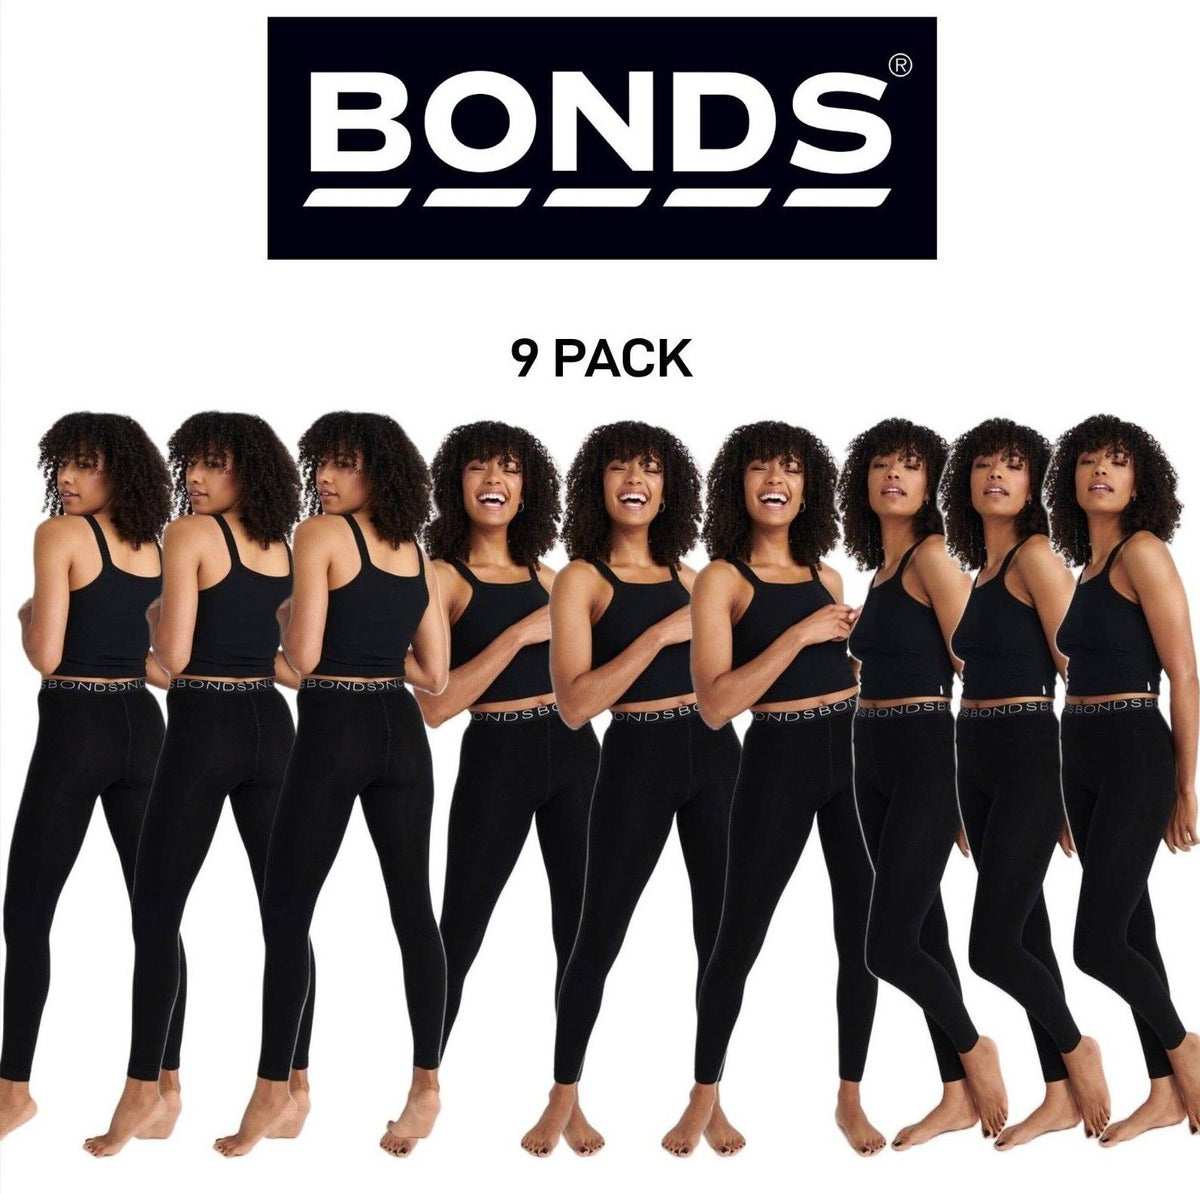 Bonds Womens Fleecy Legging Soft Fleece Fabric for Ultimate Warmth 9 Pack L79542